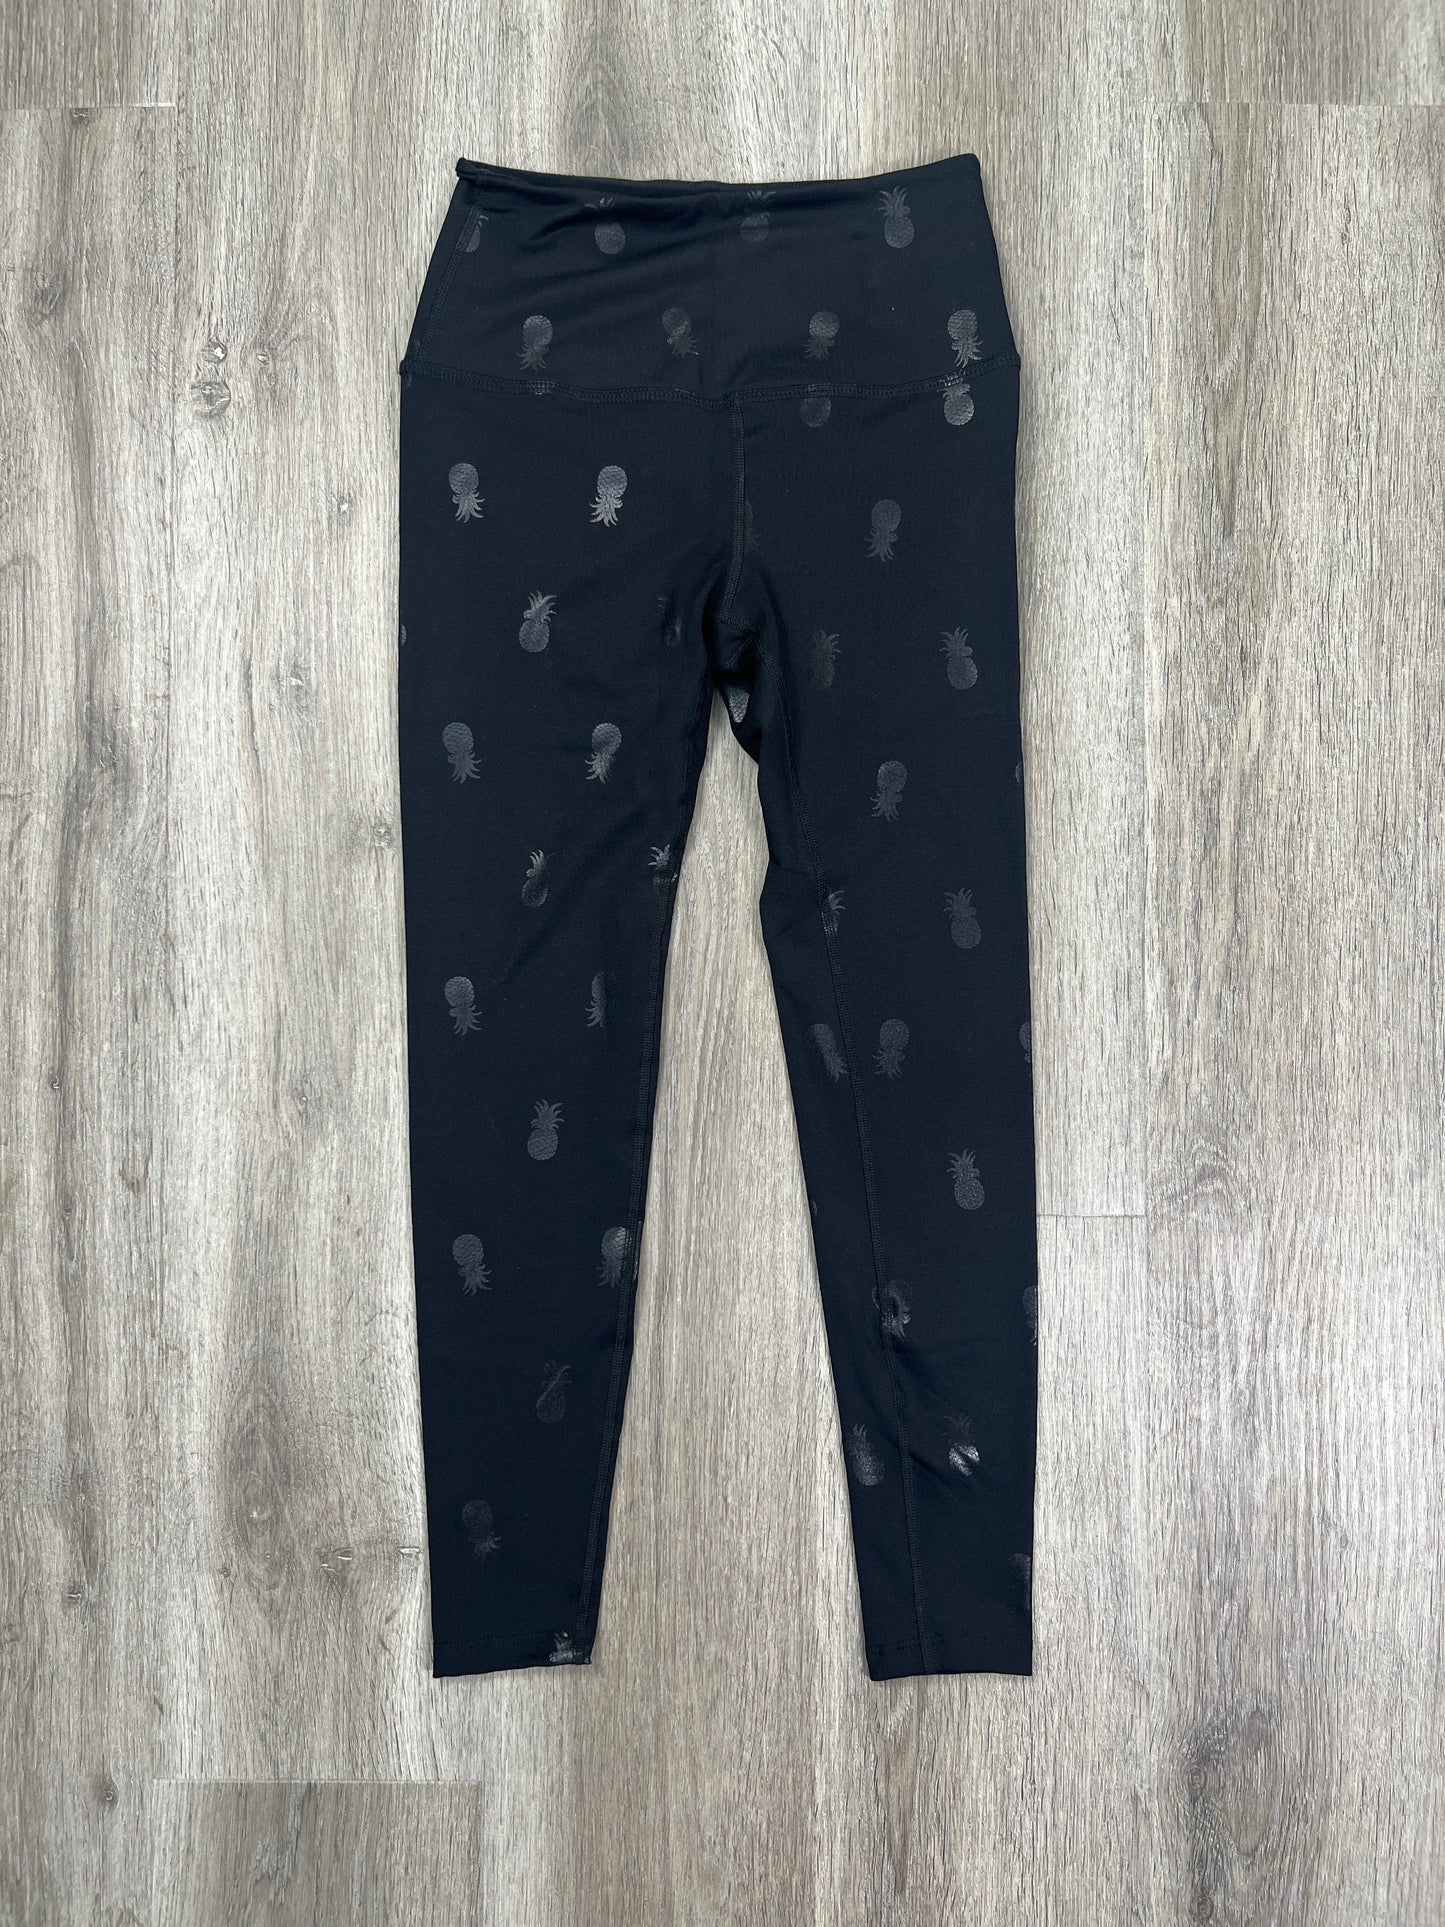 Athletic Leggings By Beyond Yoga  Size: Xs